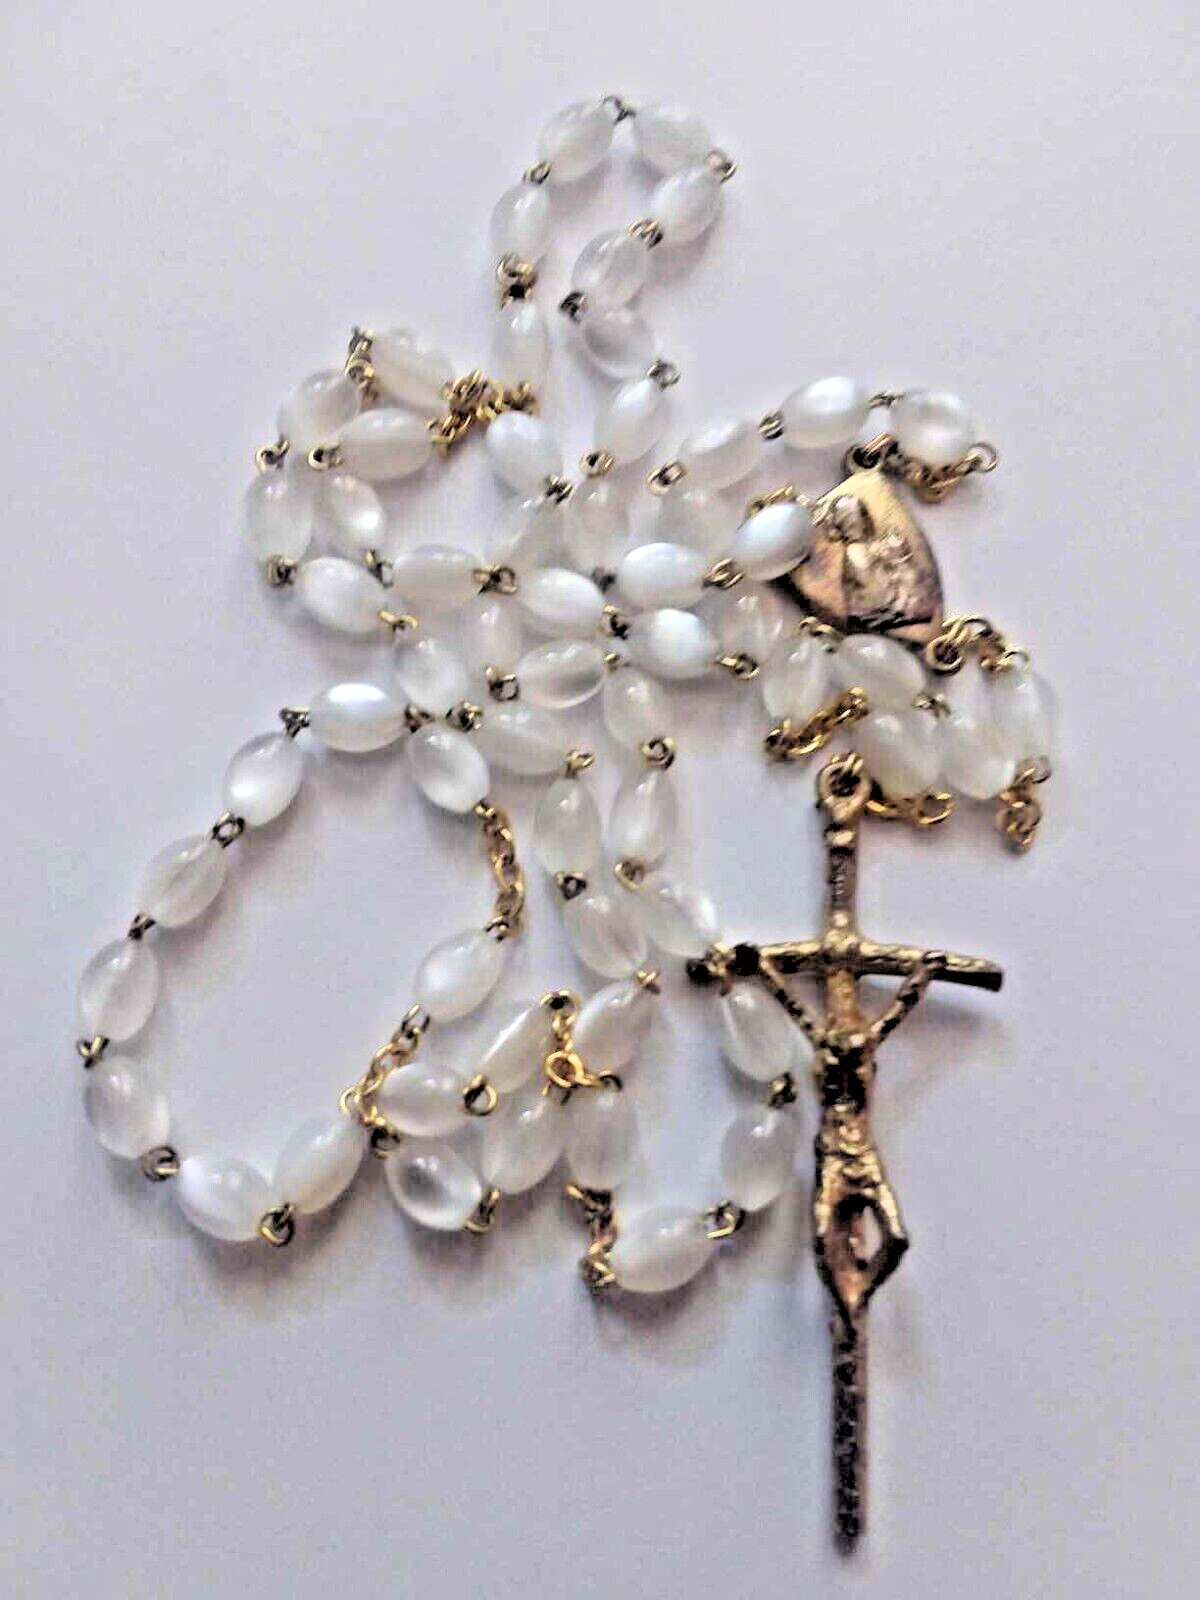 POPE JOHN PAUL II GIVEN BLESSED VATICAN ROSARY FOR PILGRIMAGE  WITH PHOTO PROOF